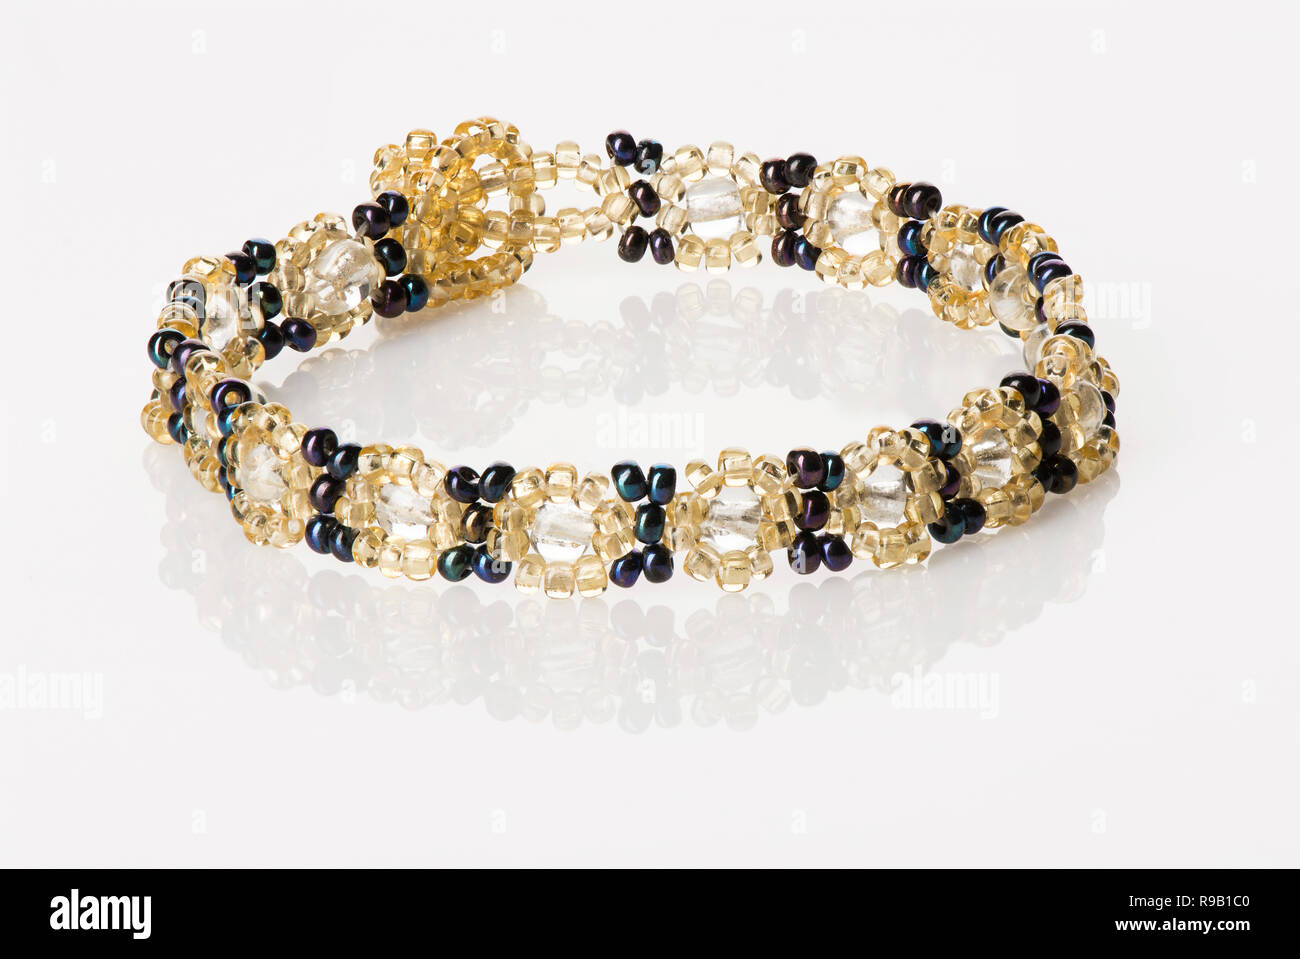 Women's Beaded Bracelet - Gold and Navy Blue, on white with reflection Stock Photo